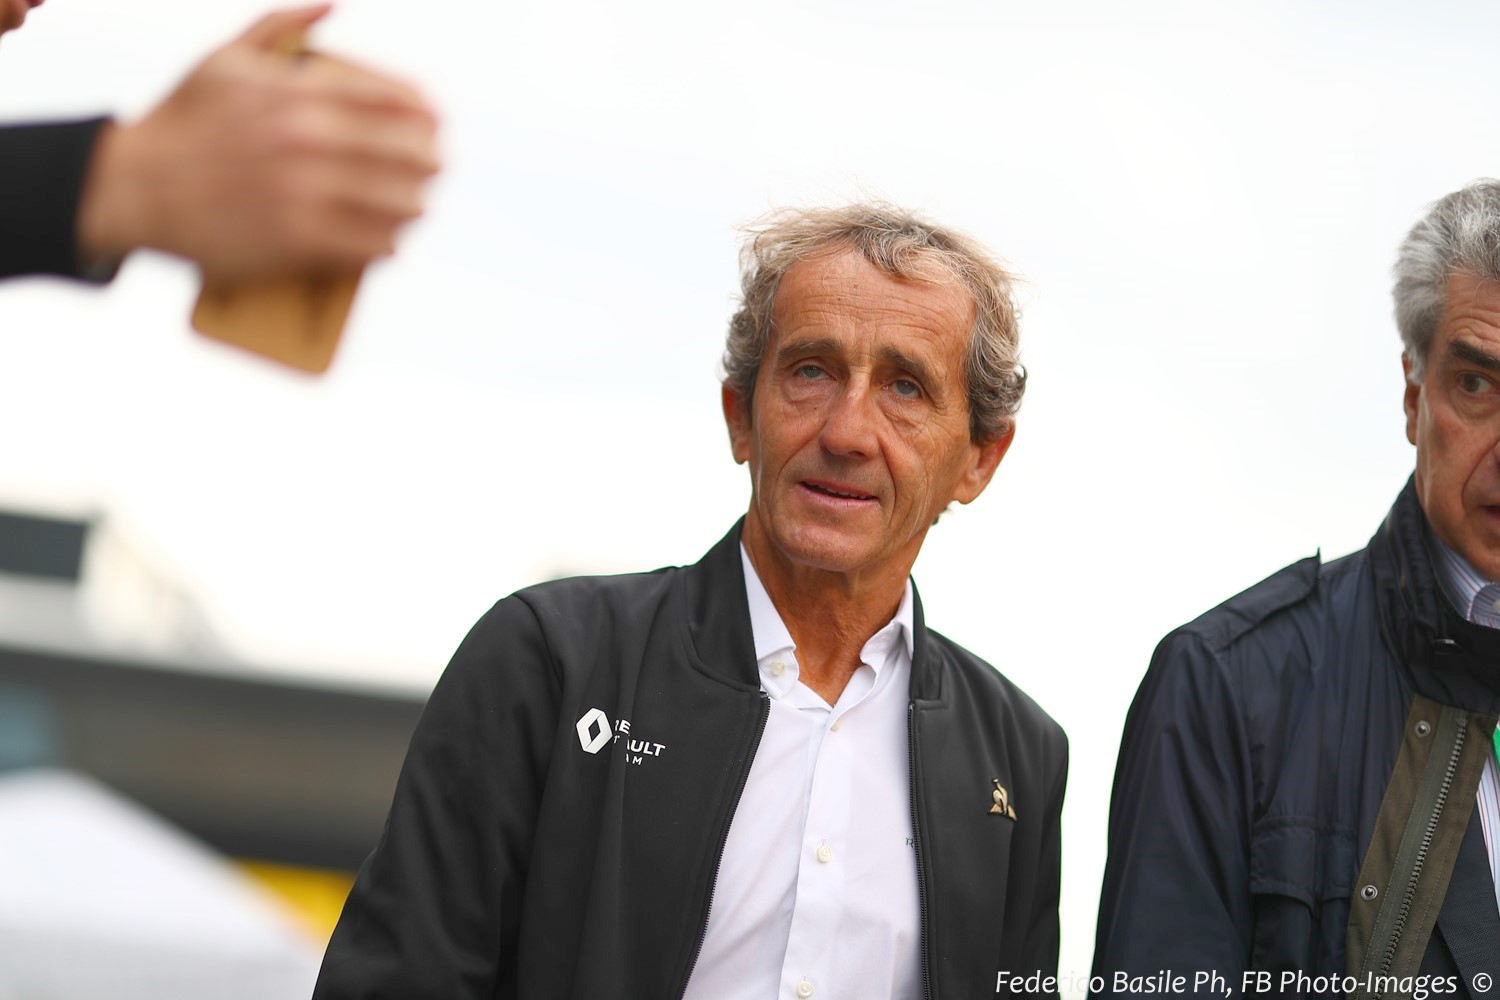 Alain Prost realizes that since his French Renault team stinks and Pierre Gasly got his lunch eaten by Max Verstappen, the French fans had nothing to cheer for